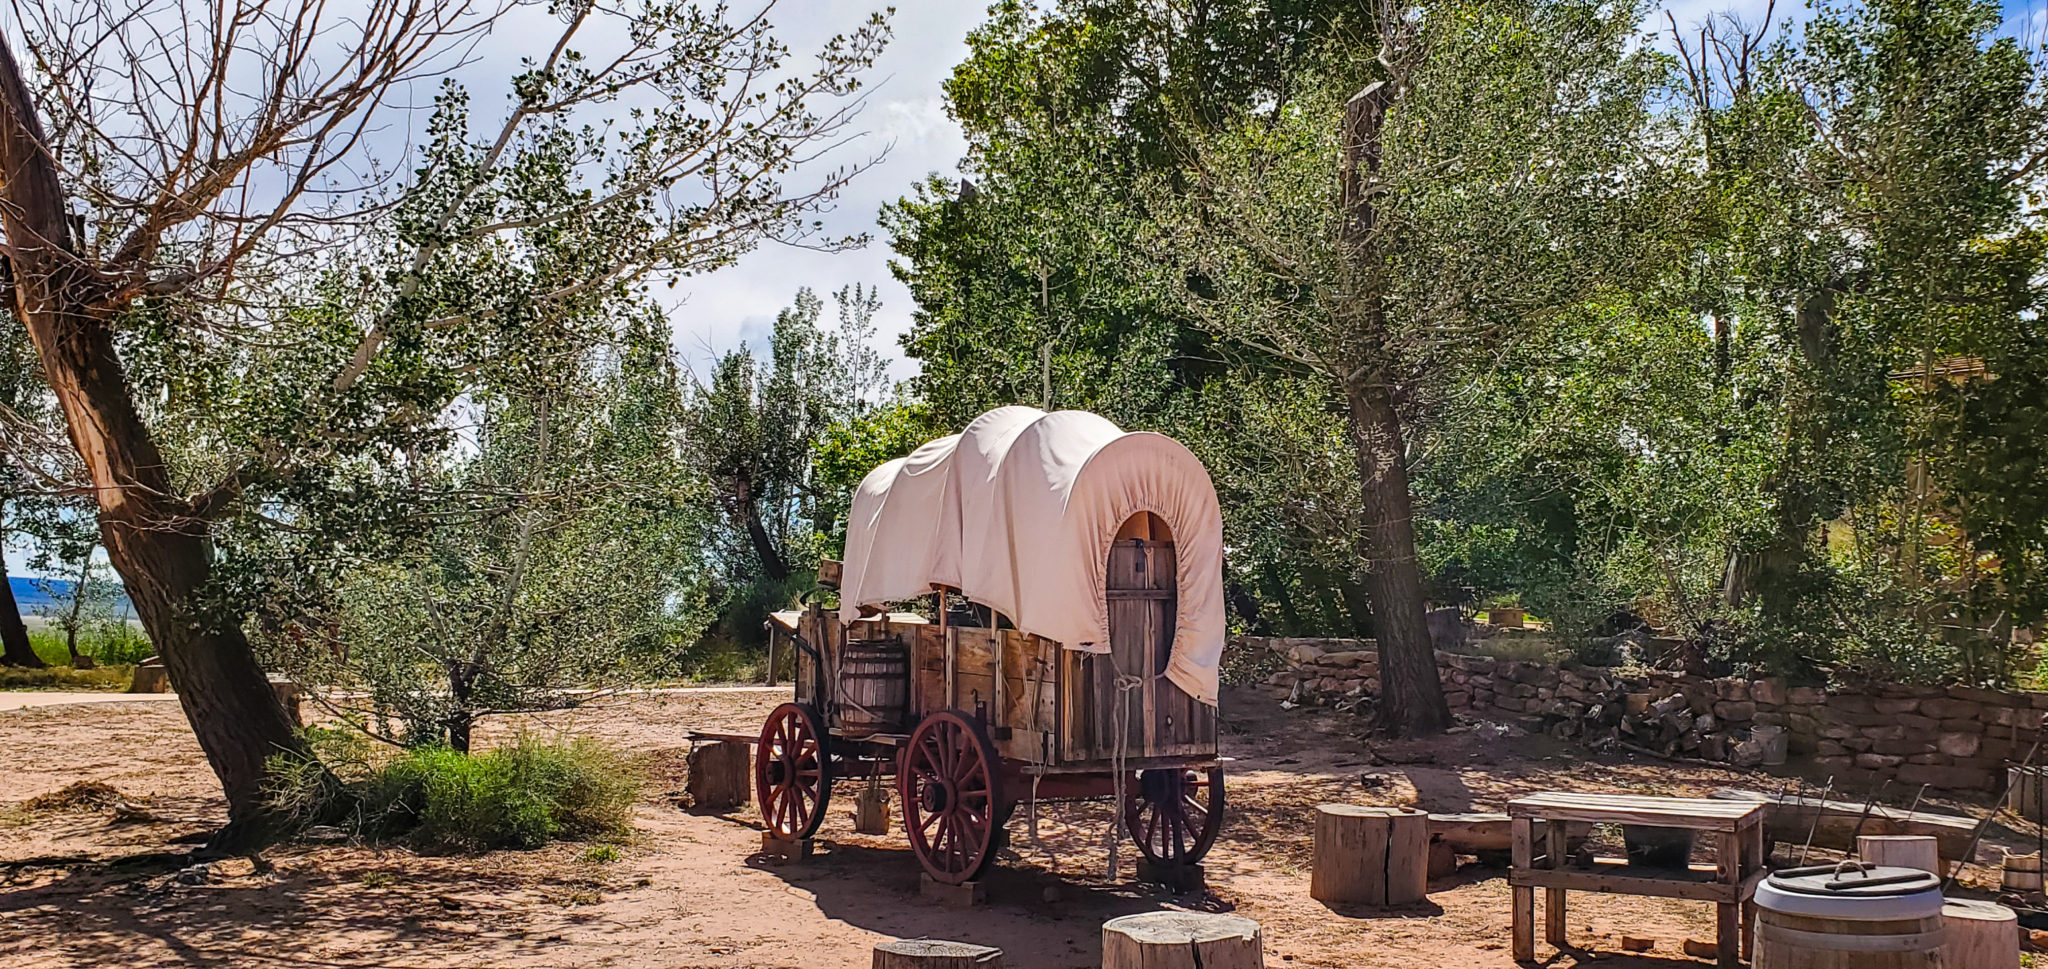 Outdoor displays of wagons and dwellings are neat to see when you visit Pipe Spring National Monument in Arizona.